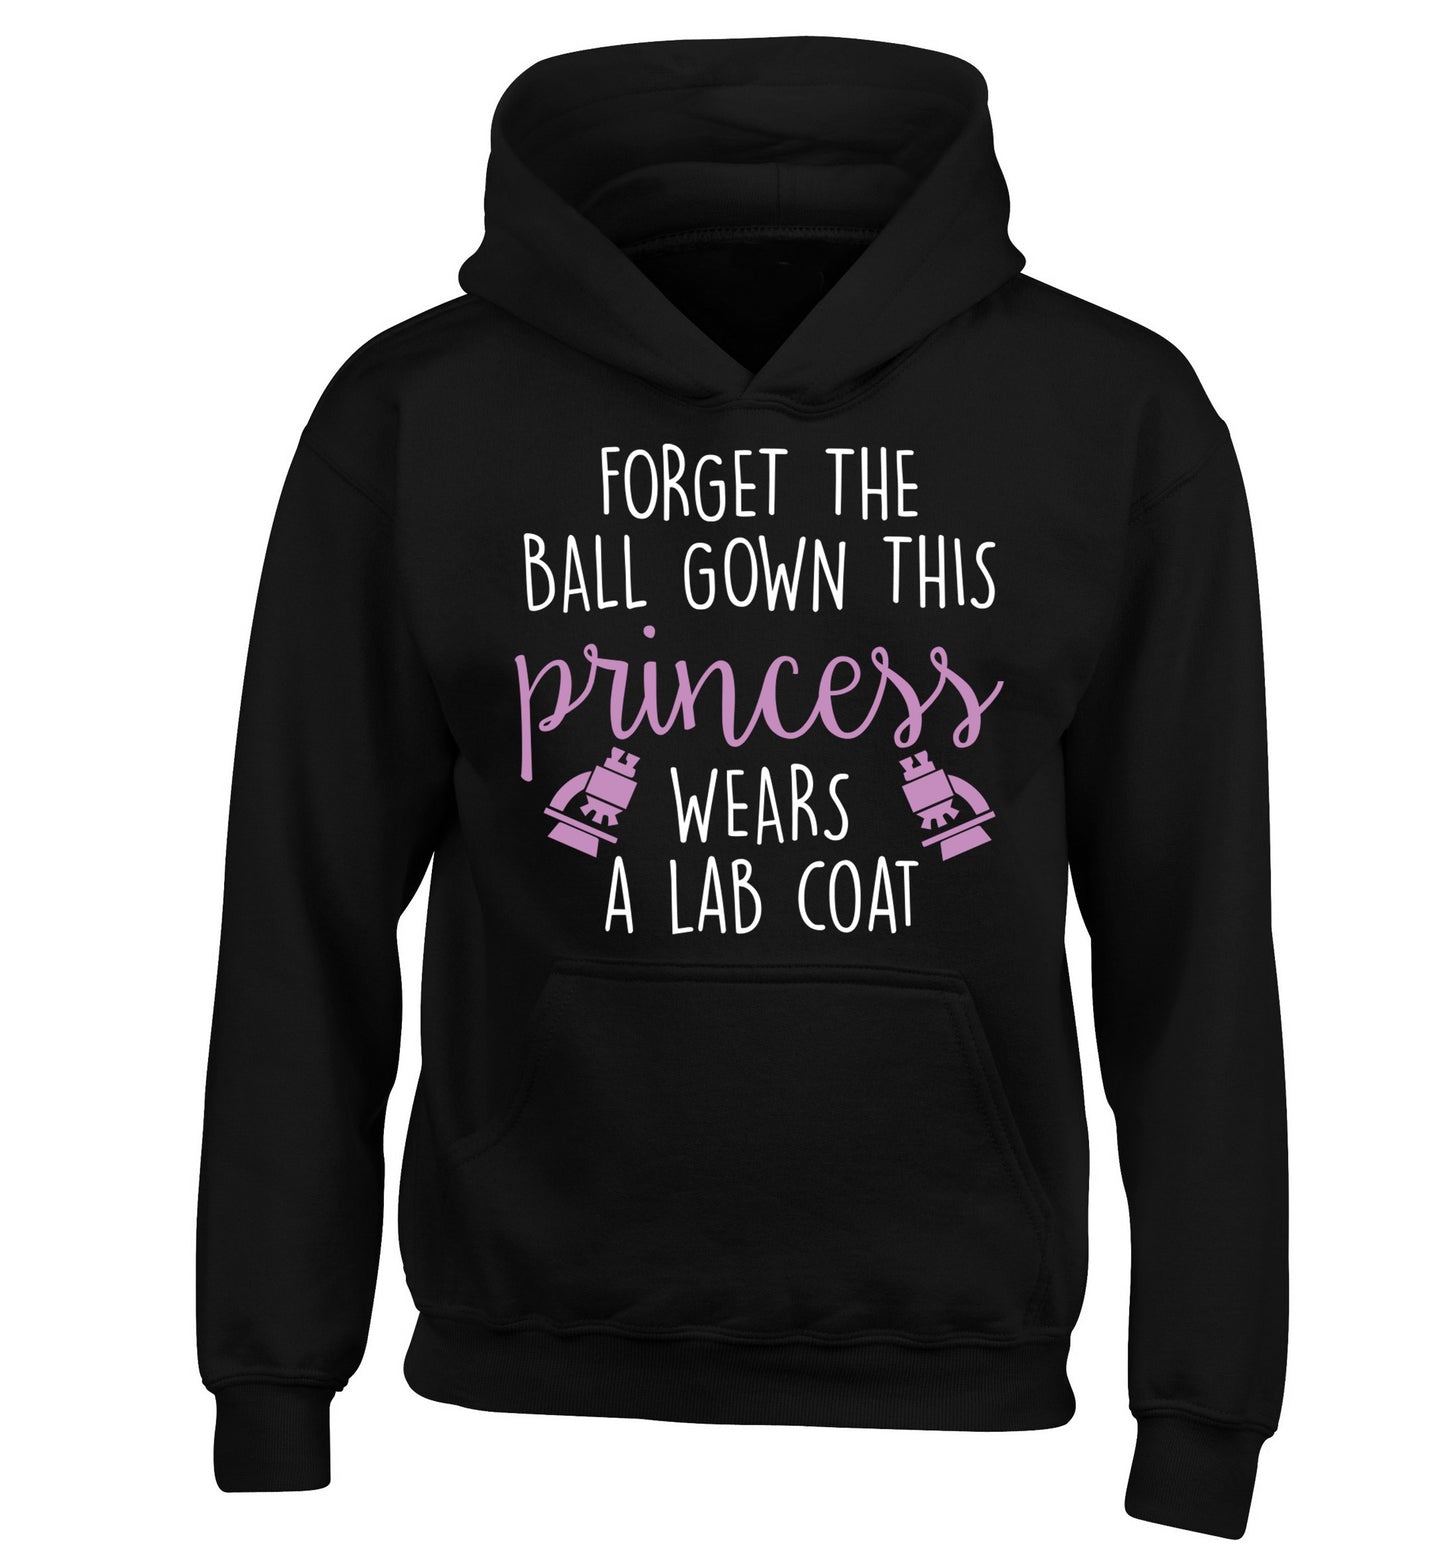 Forget the ball gown this princess wears a lab coat children's black hoodie 12-14 Years